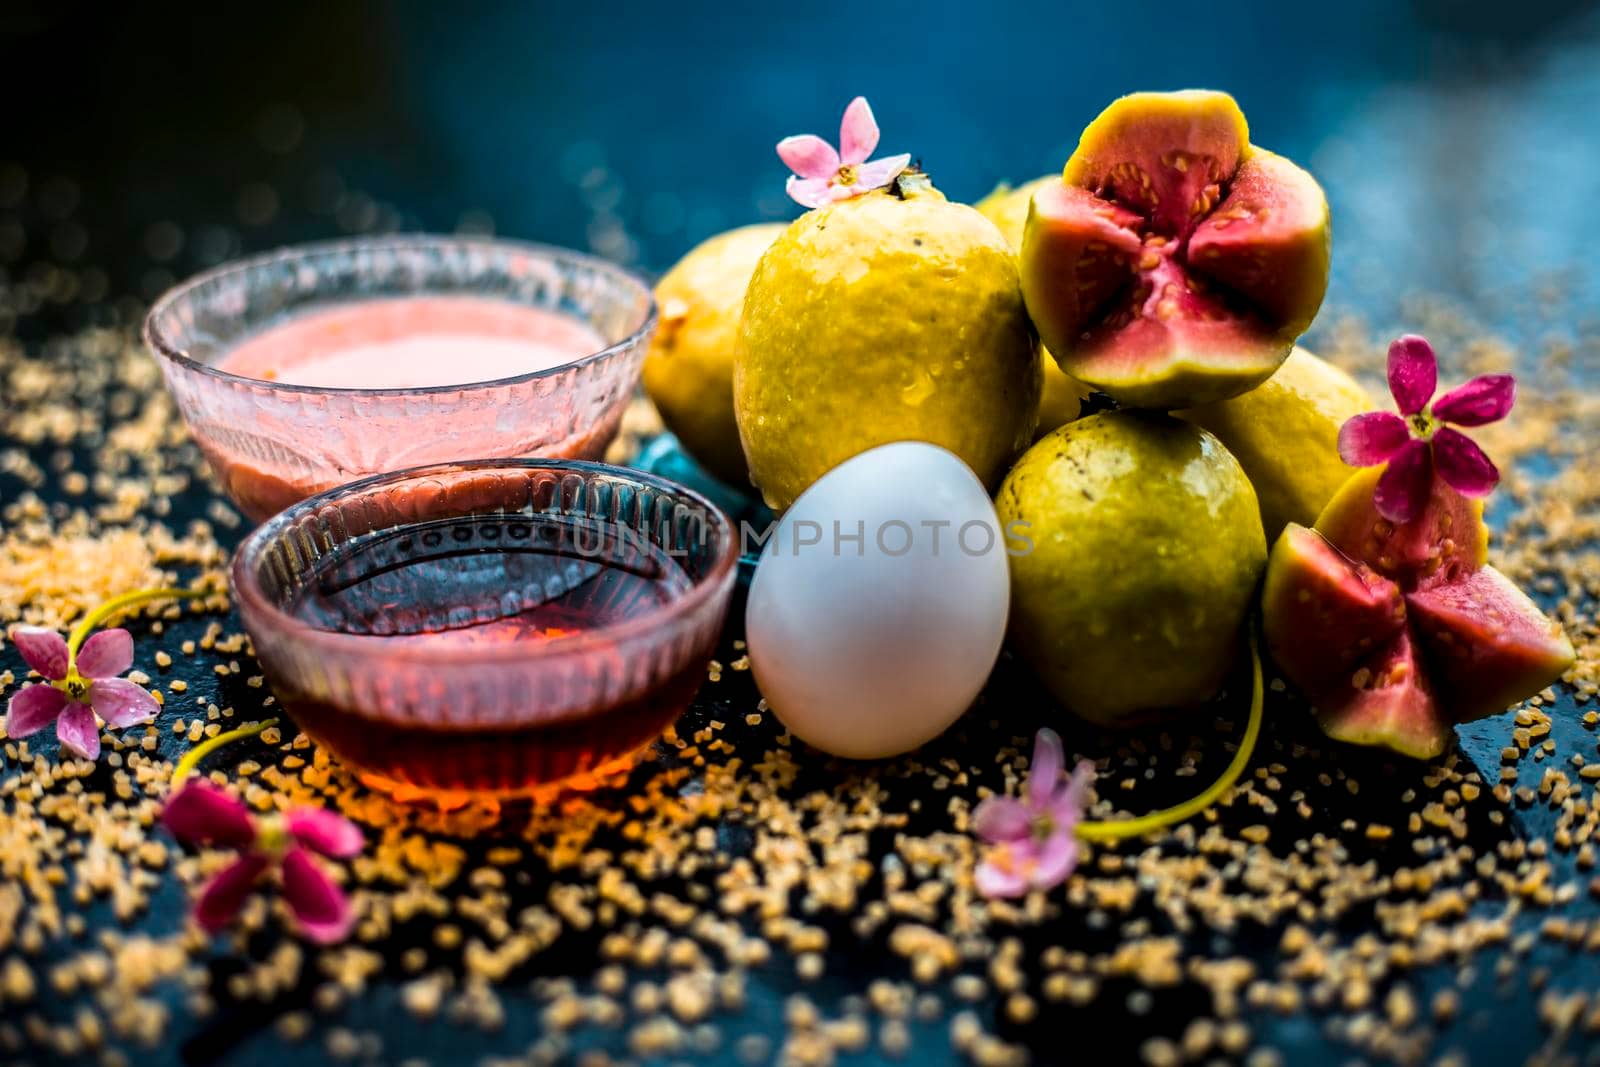 Treatment of dry skin with the help of face mask on a wooden surface consisting of honey, guava pulp, egg yolk, and some oatmeal, well mixed in a glass bowl along with raw ingredients. by mirzamlk